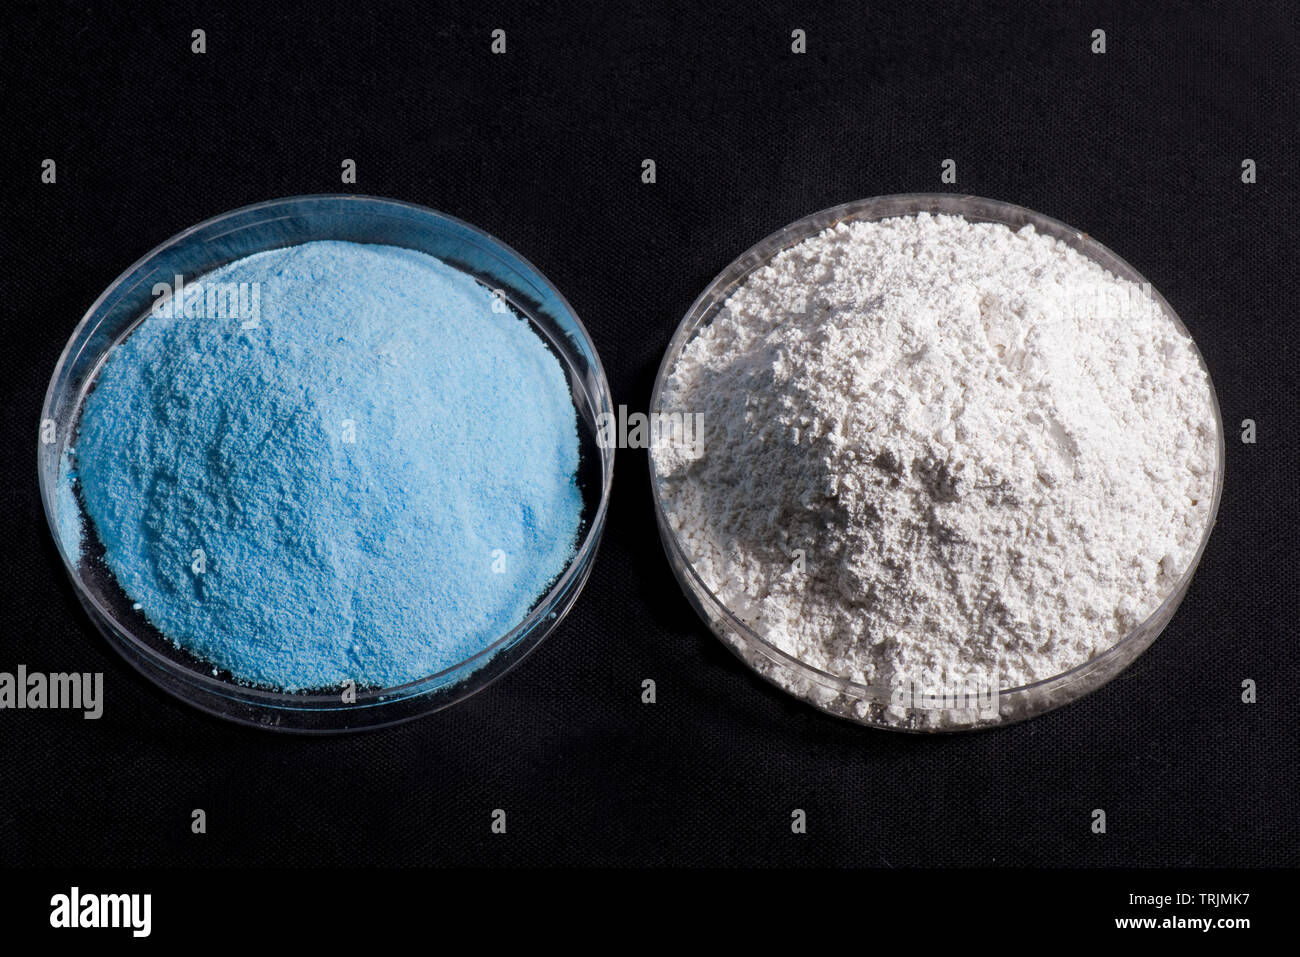 Components of traditional fungicide, Bordeaux mixture, copper sulphate and slaked lime (Calcium hydroxide), widely used in agriculture and gardening Stock Photo